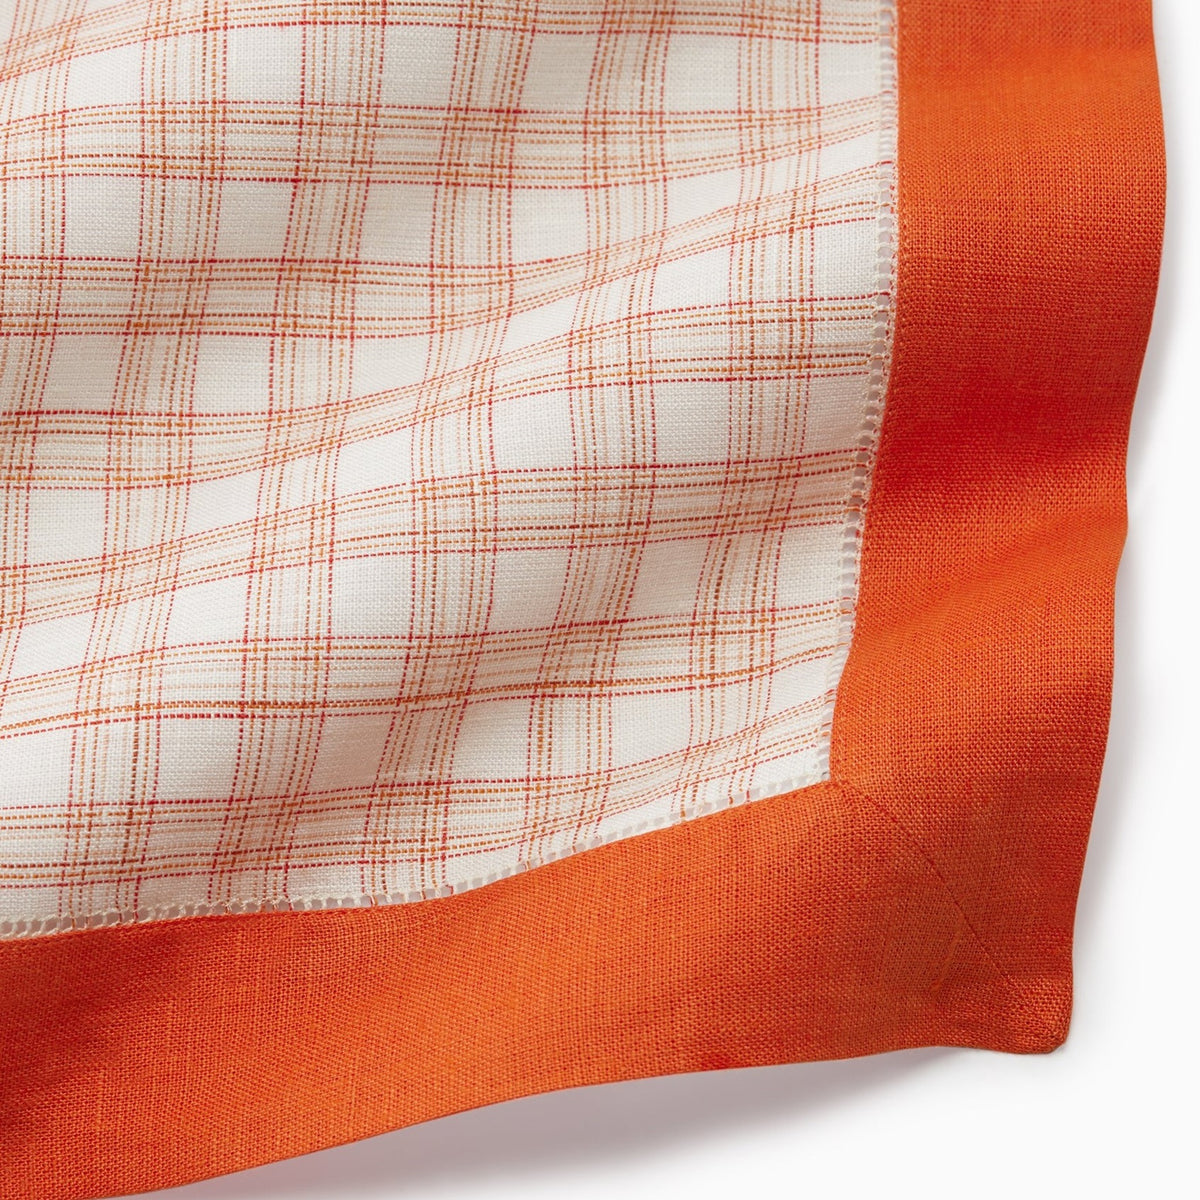 Swatch Sample of Sferra Mikela Table Linens in Color Tangerine